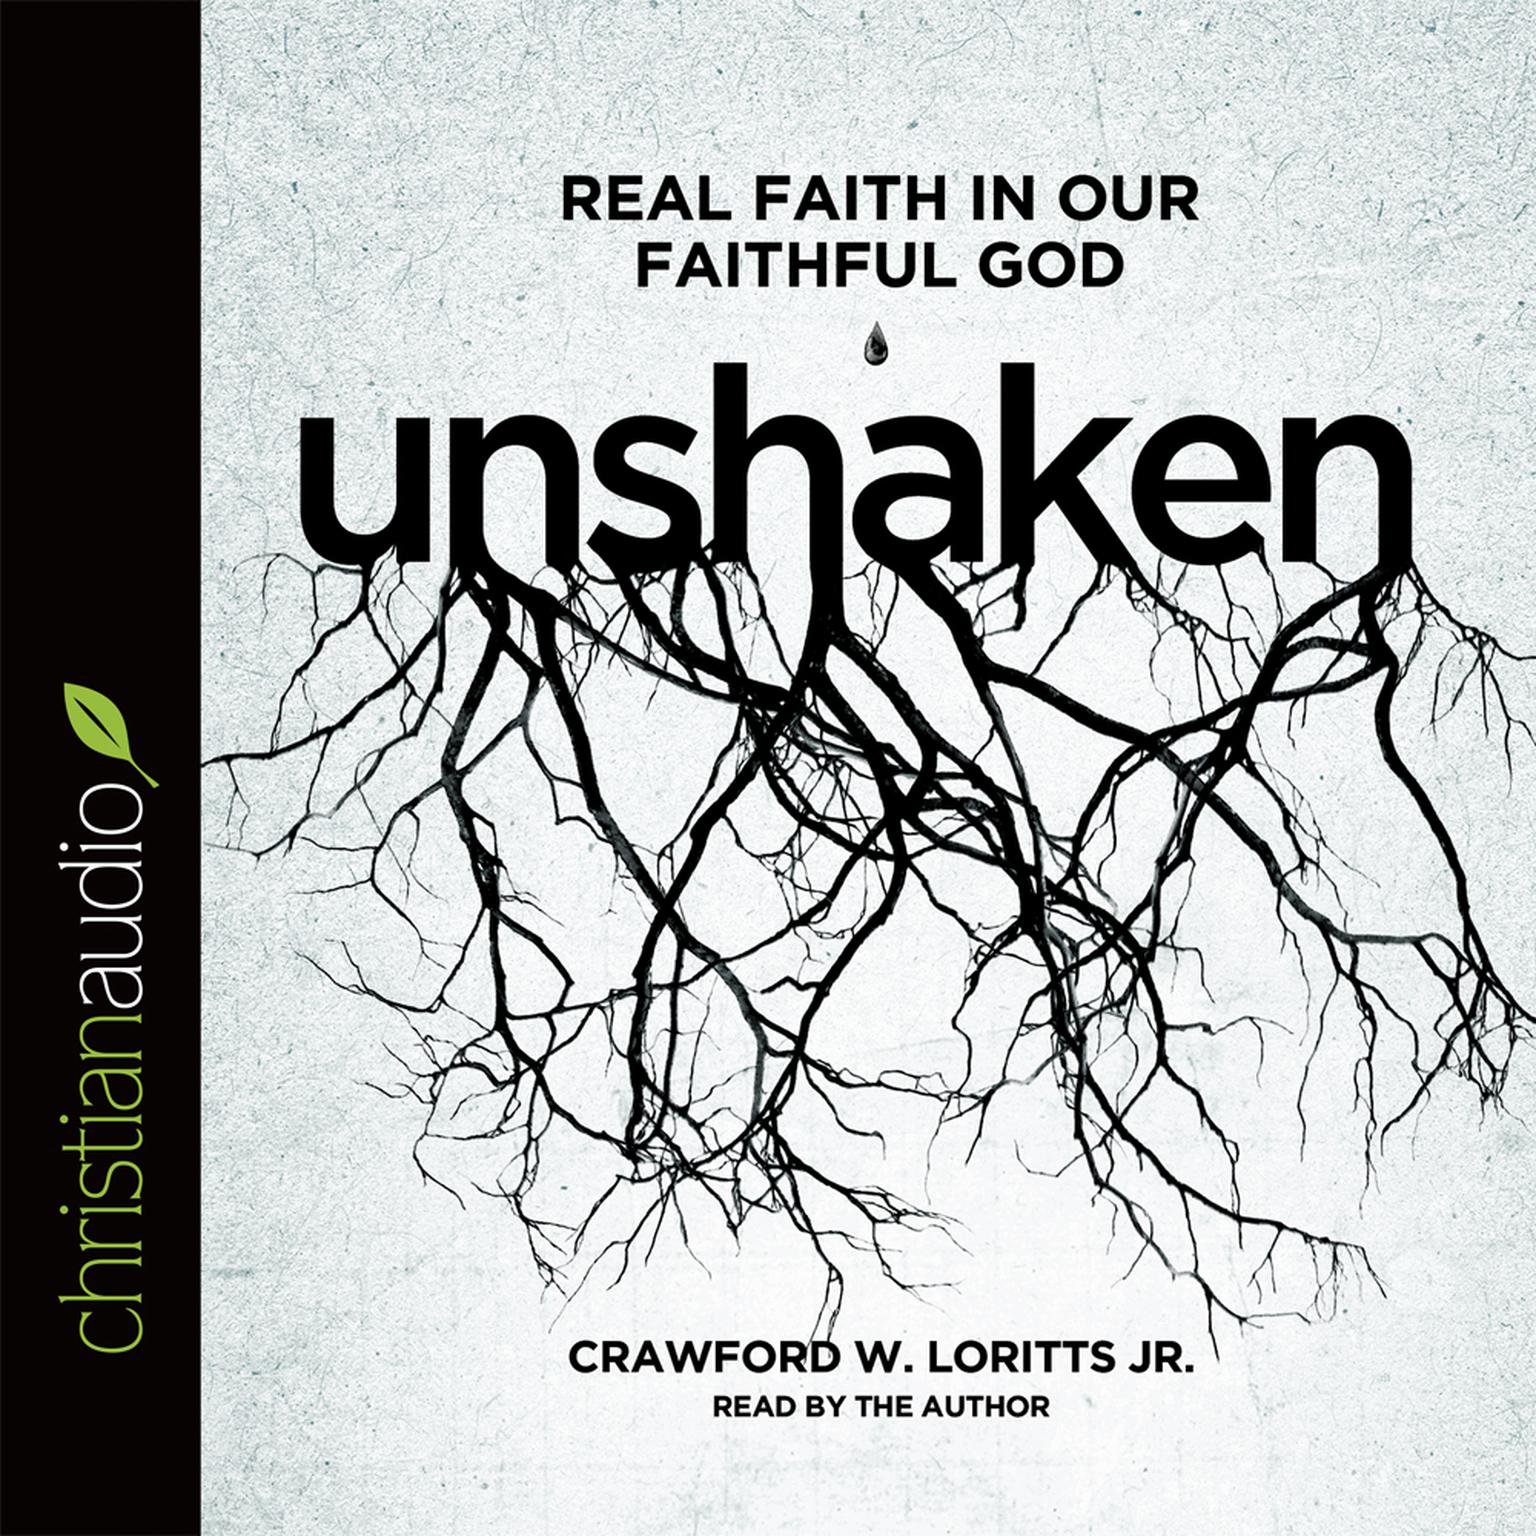 Unshaken: Real Faith in Our Faithful God Audiobook, by Crawford W. Loritts